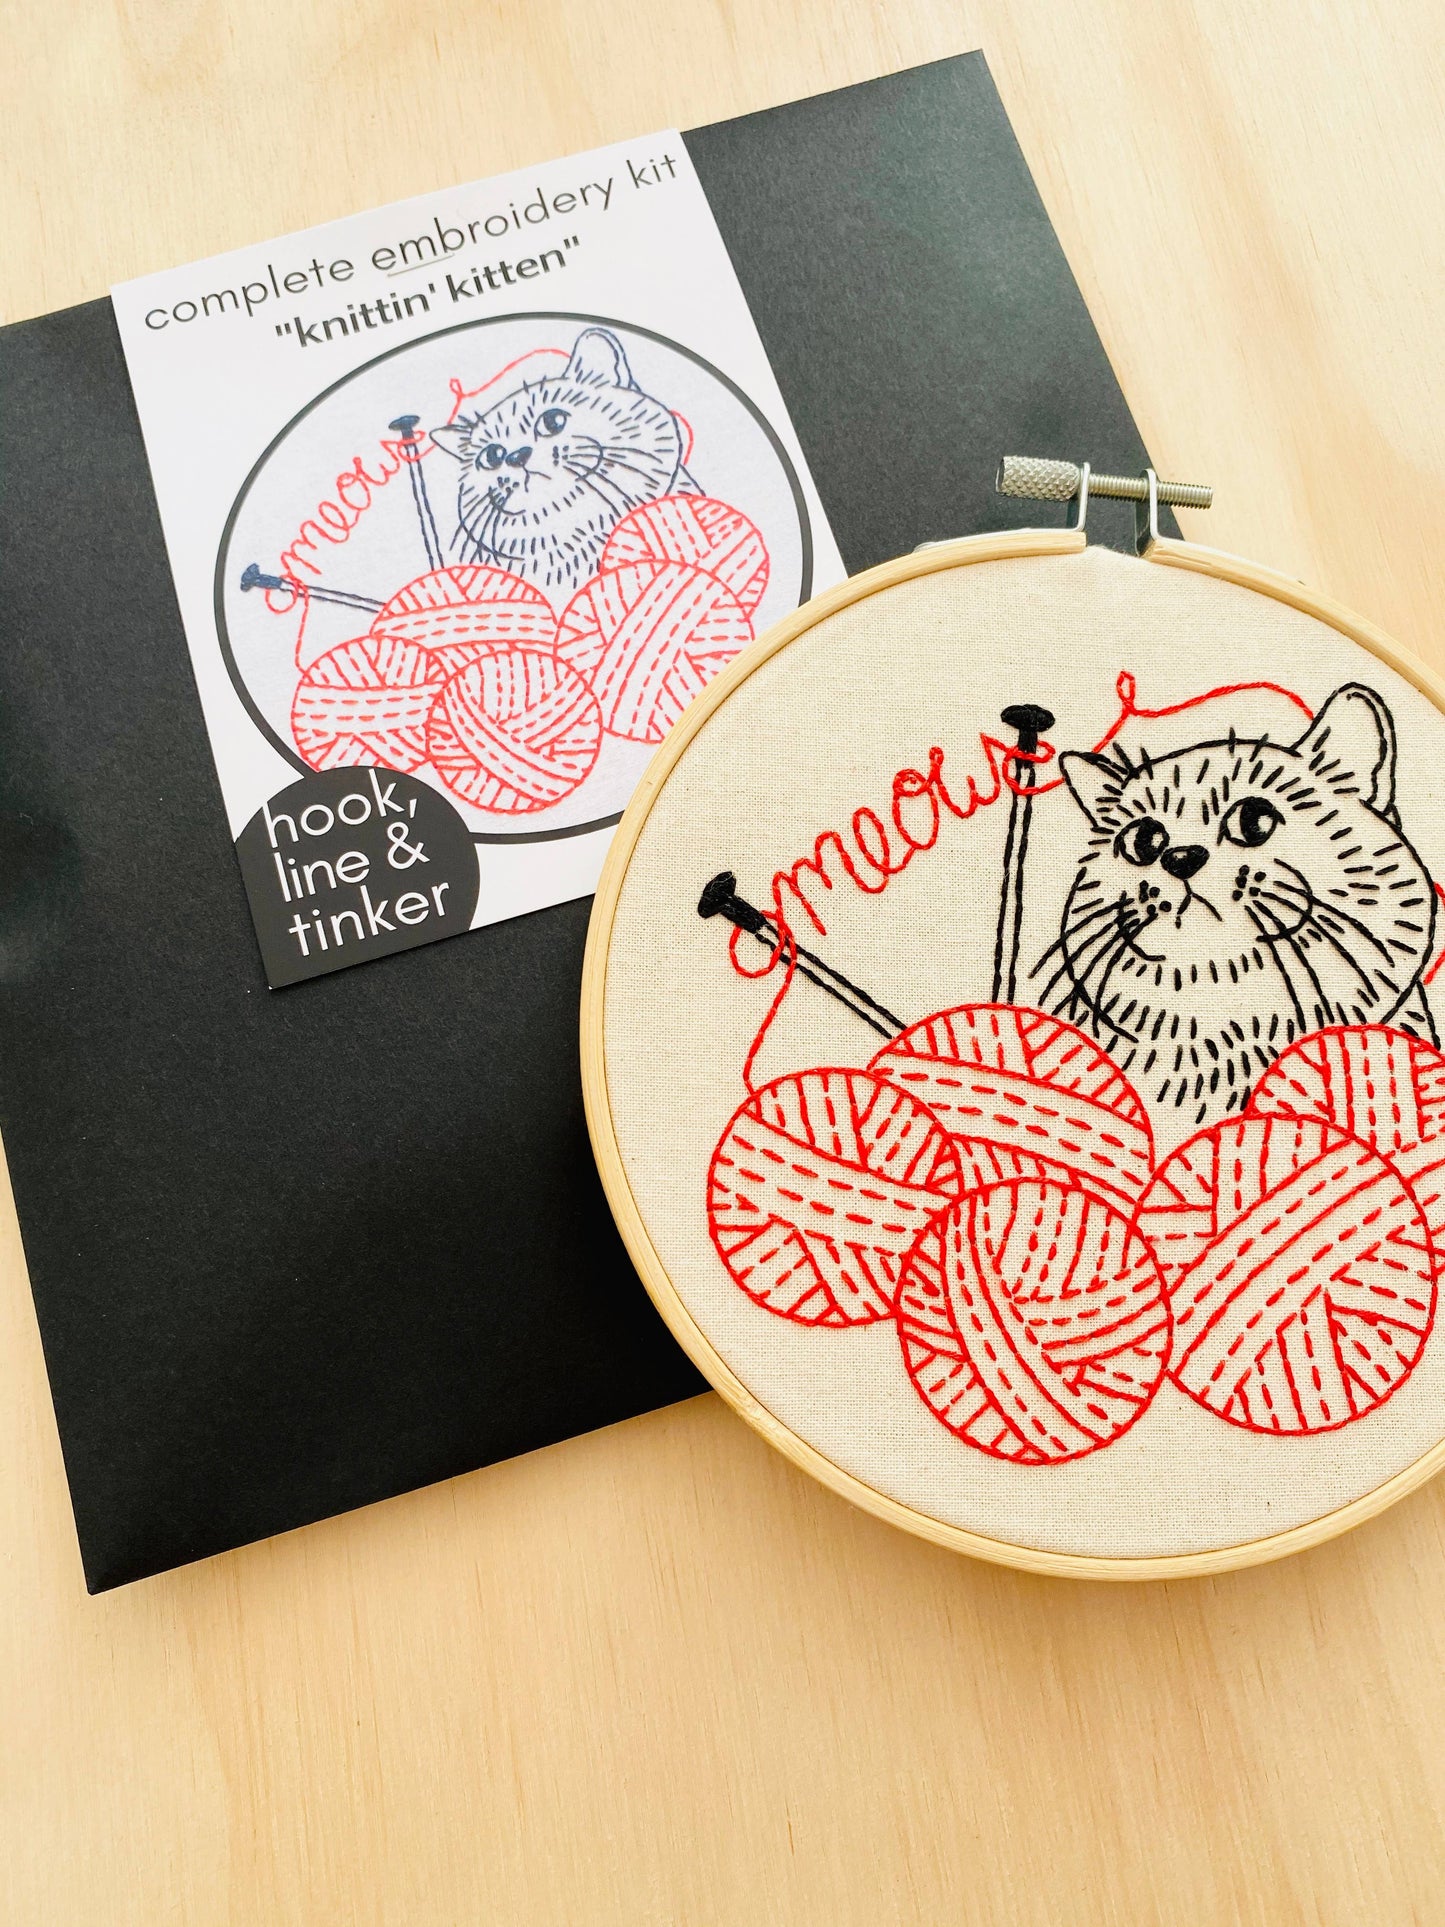 envelope and embrodery hoop with a kitten and yarn design